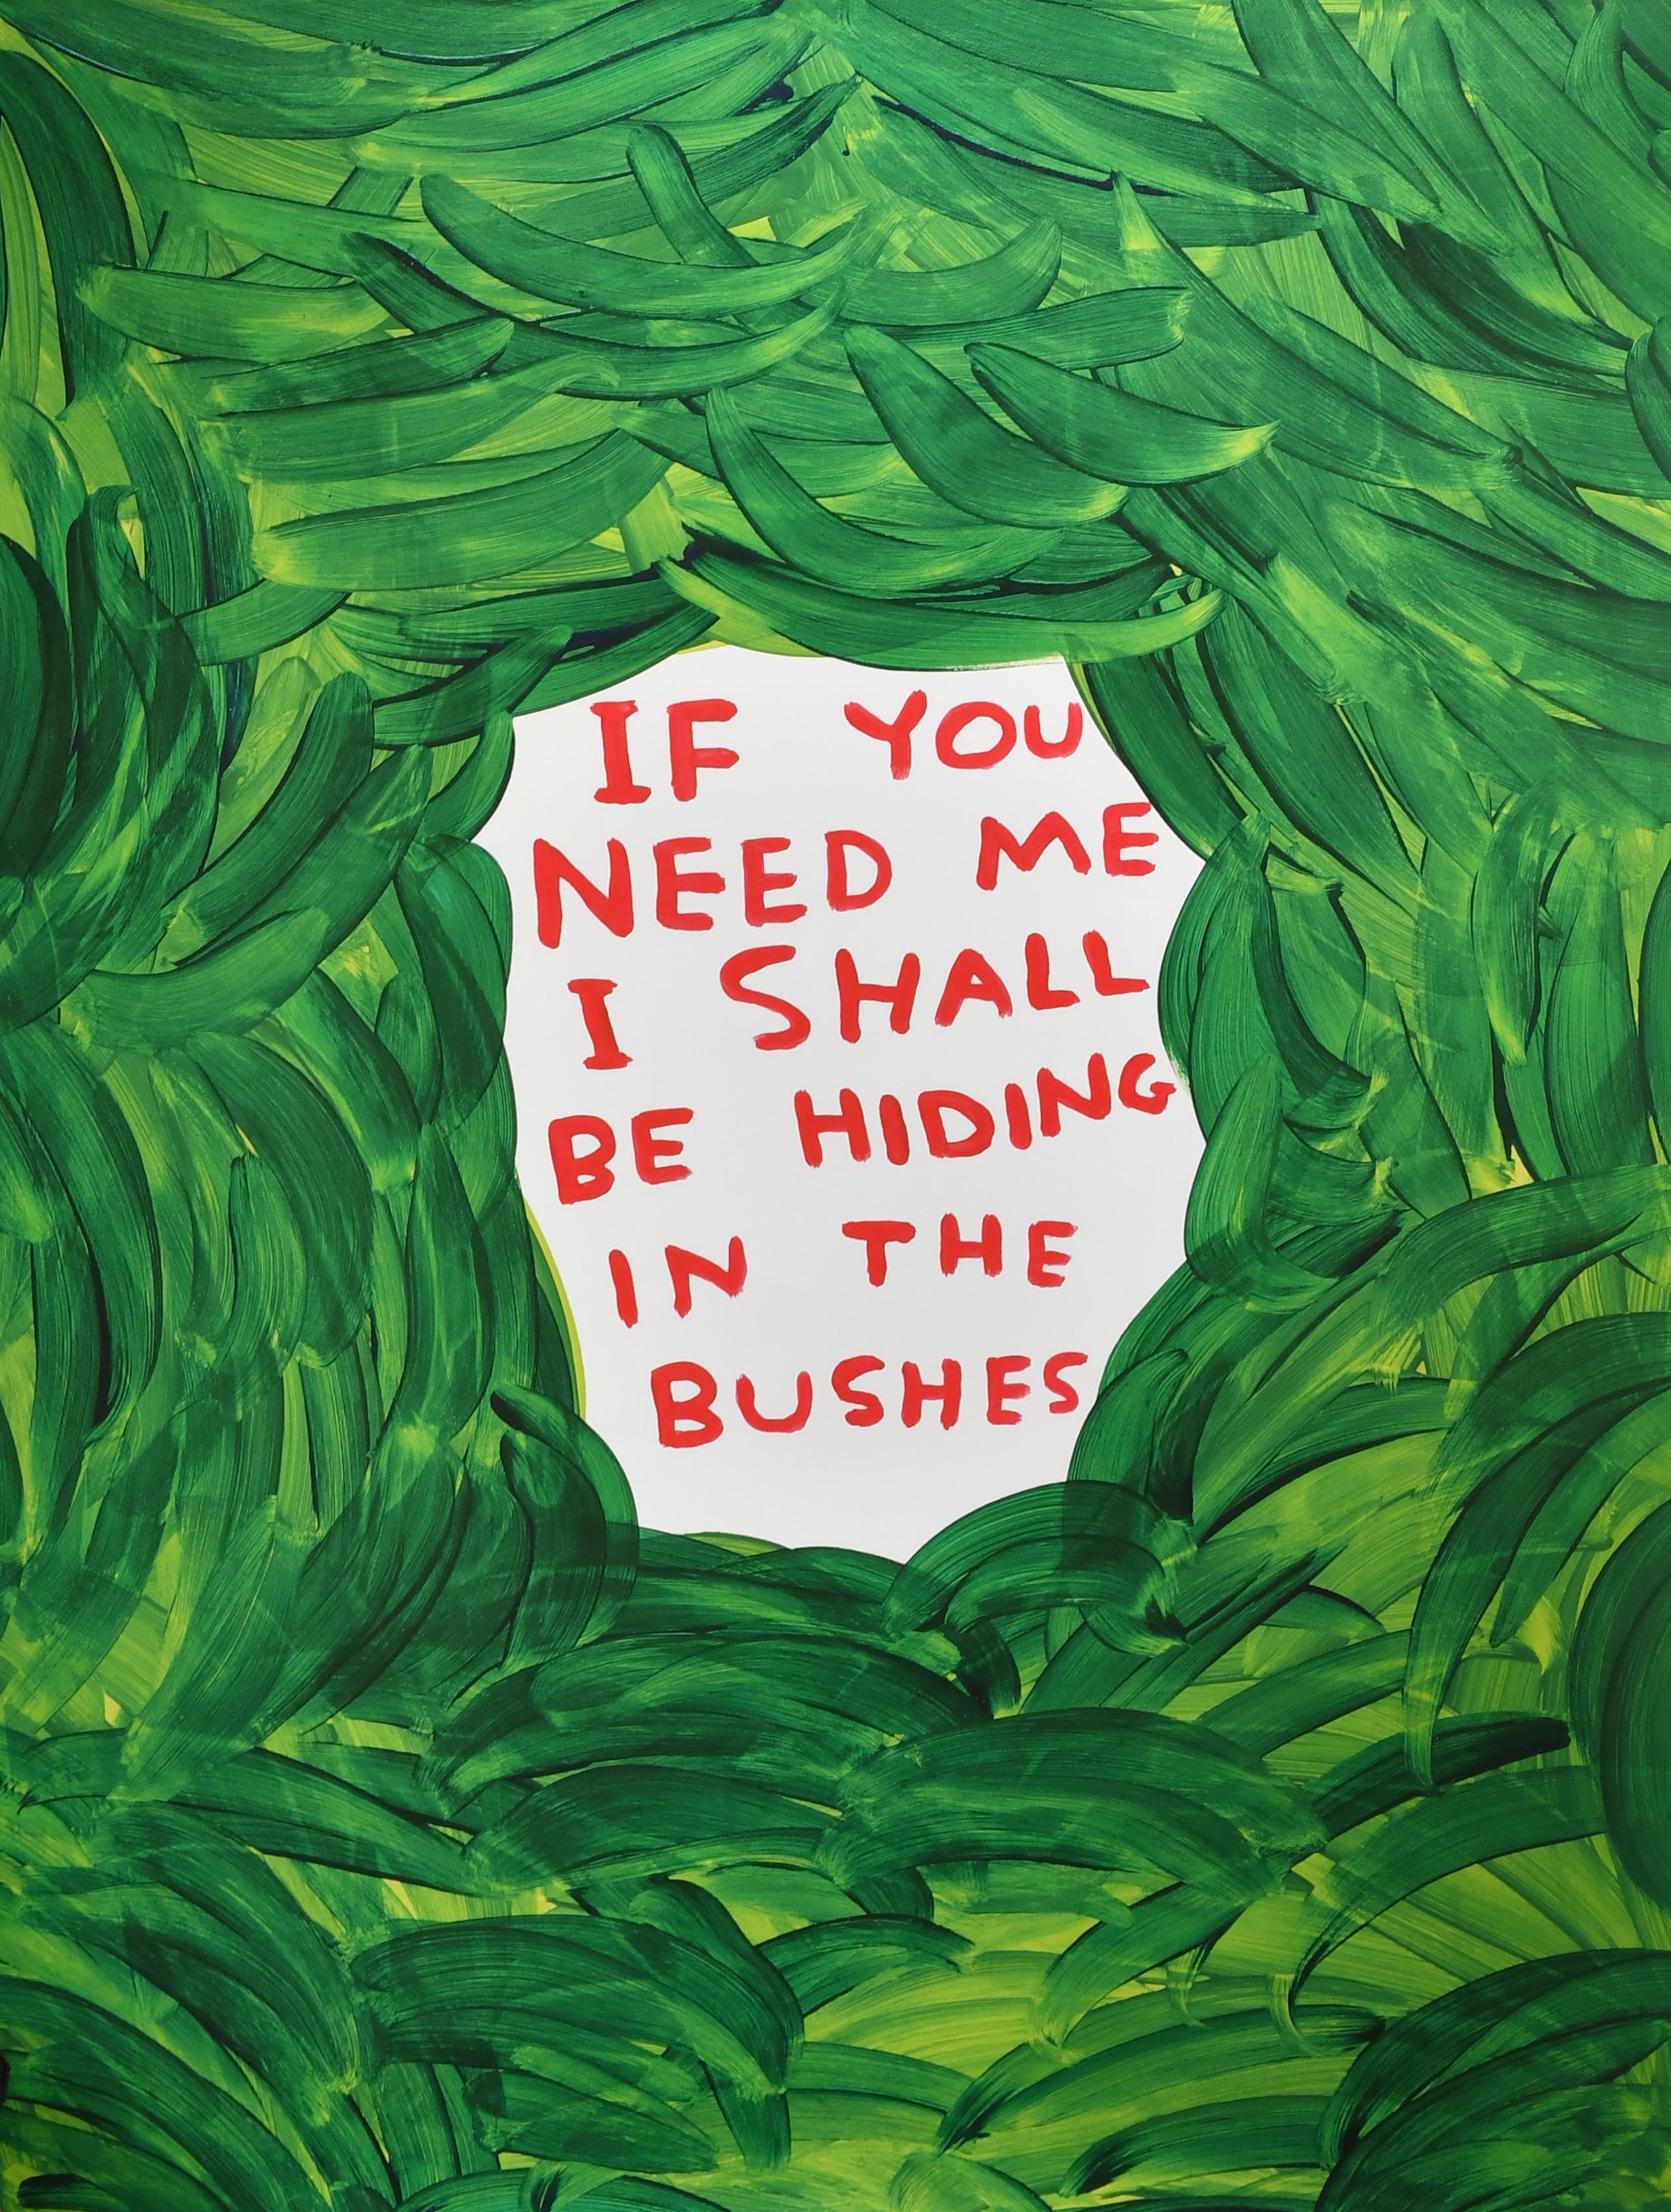 David Shrigley (1968- ) British. "If You Need Me I Shall Be Hiding In The Bushes", Lithograph,